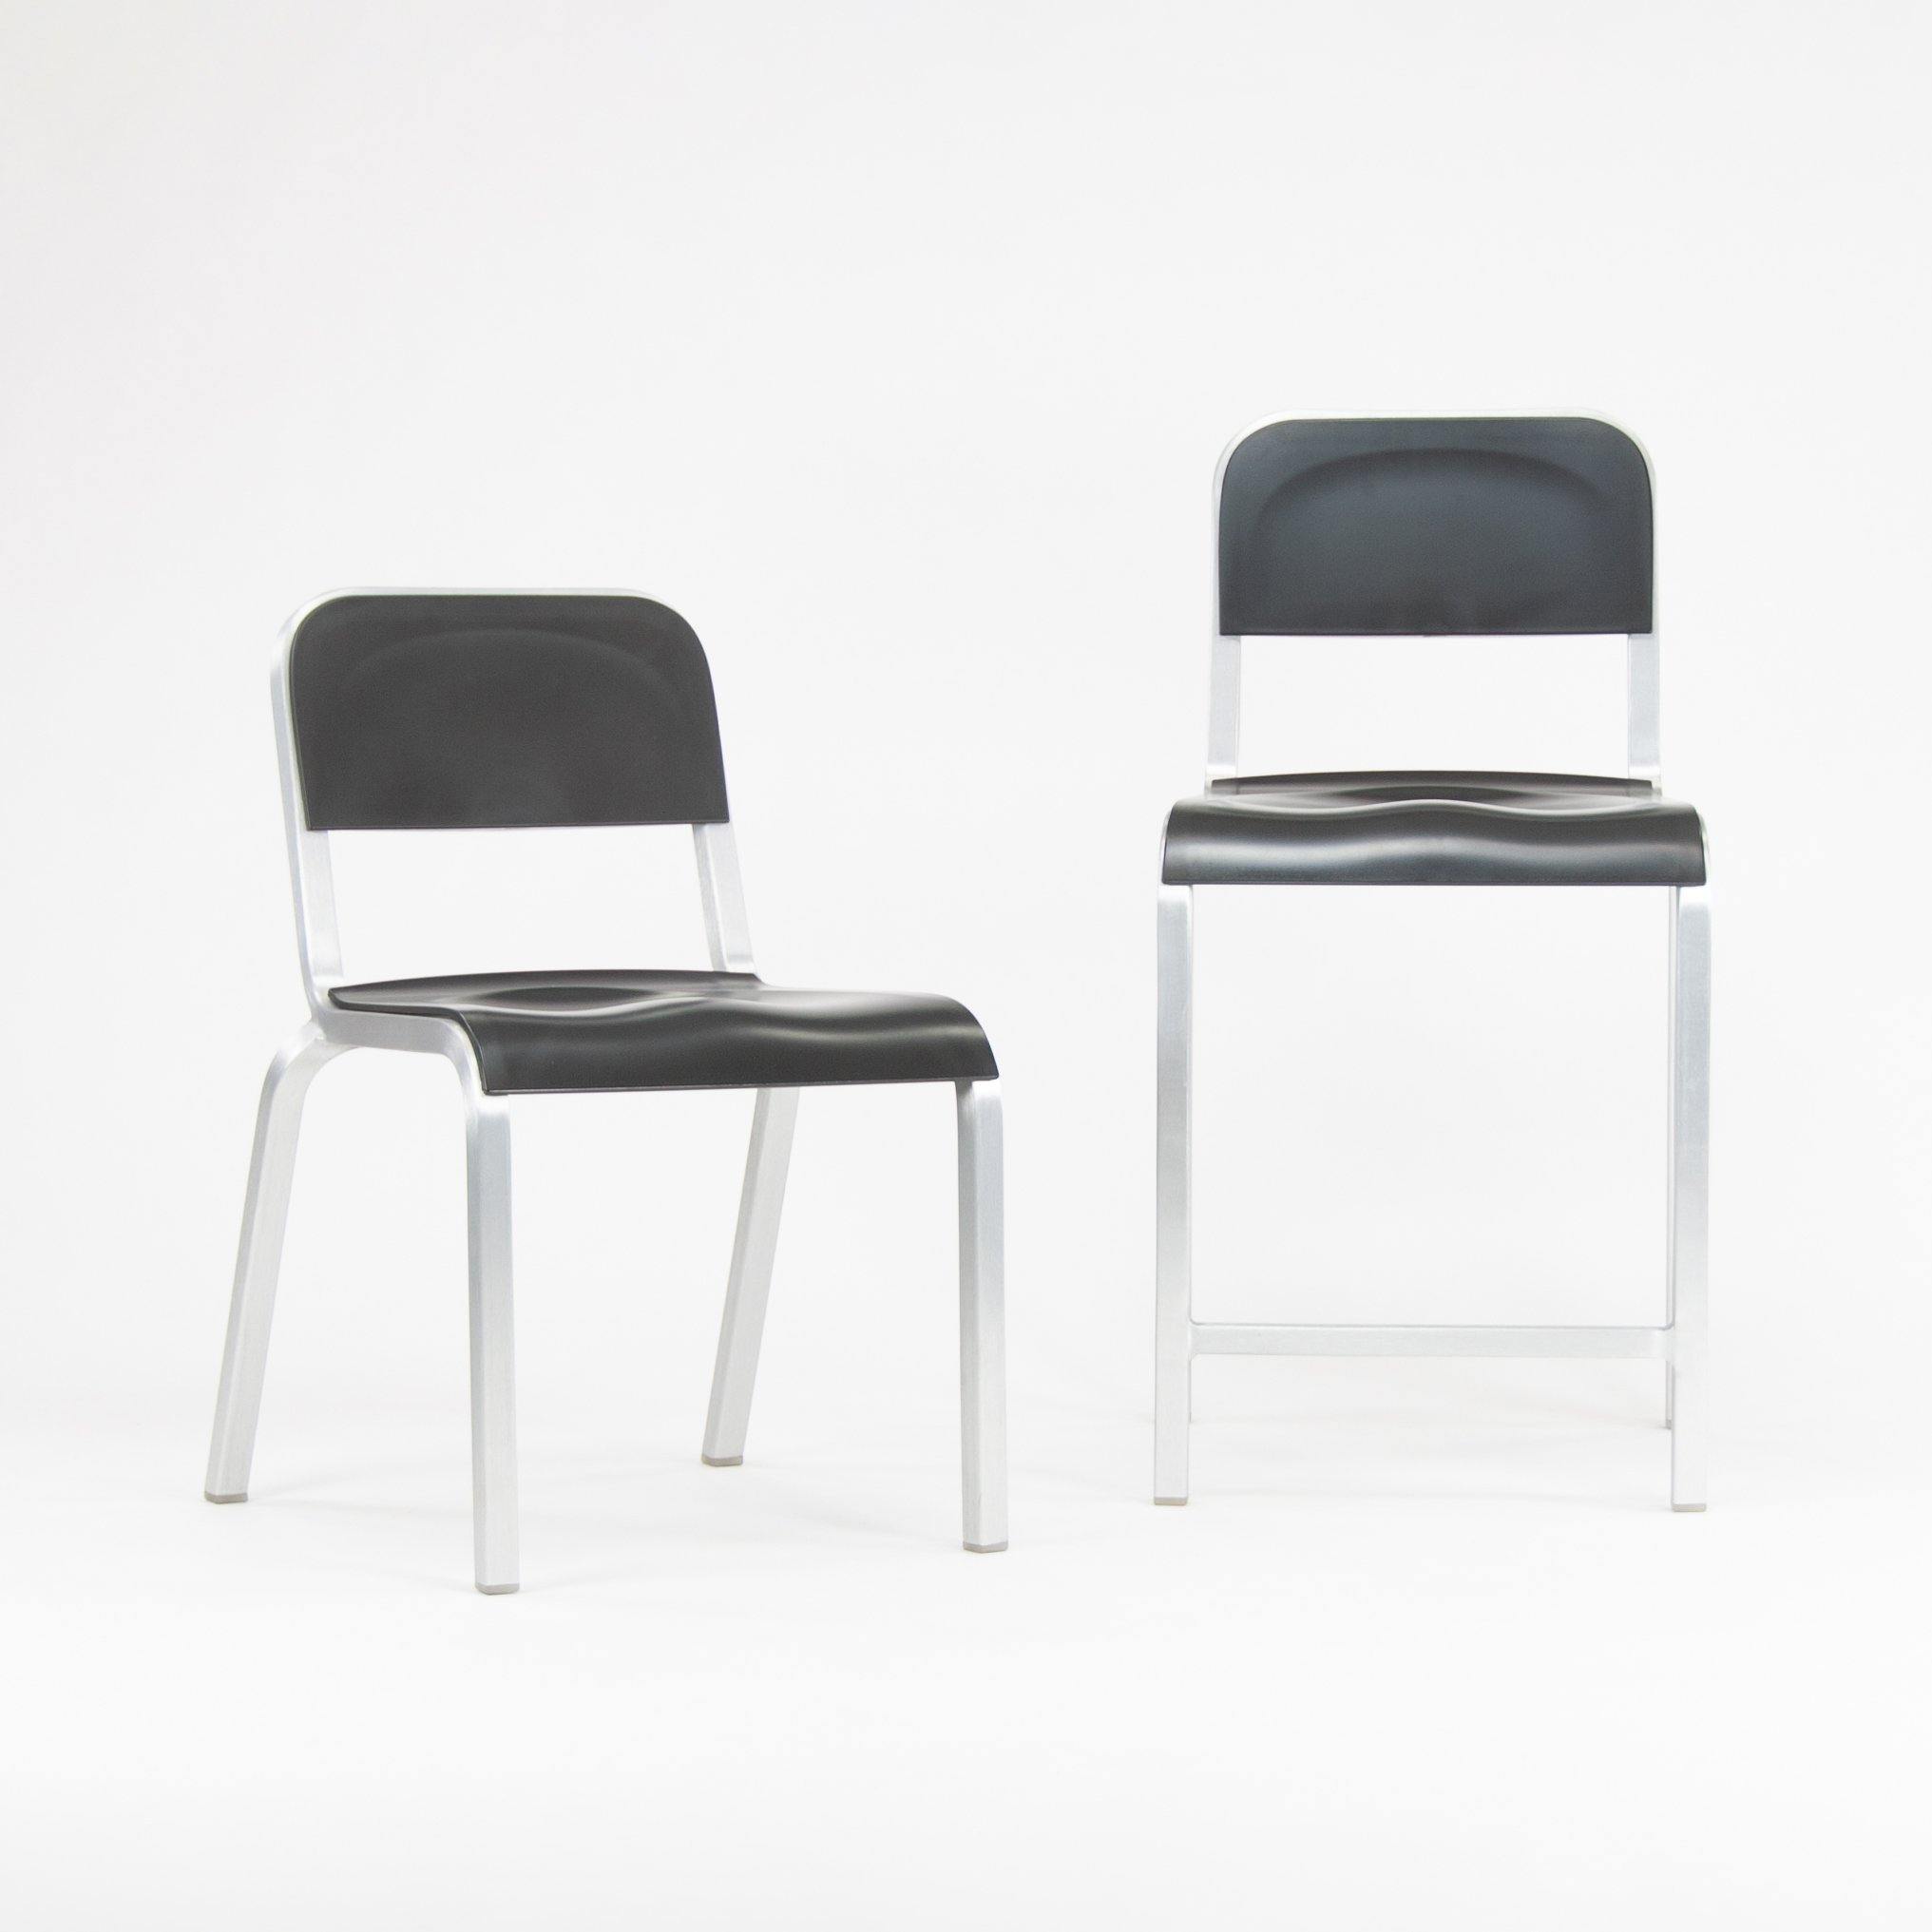 BMW Designworks for Emeco 1951 Stacking Dining Chair - Rarify Inc.